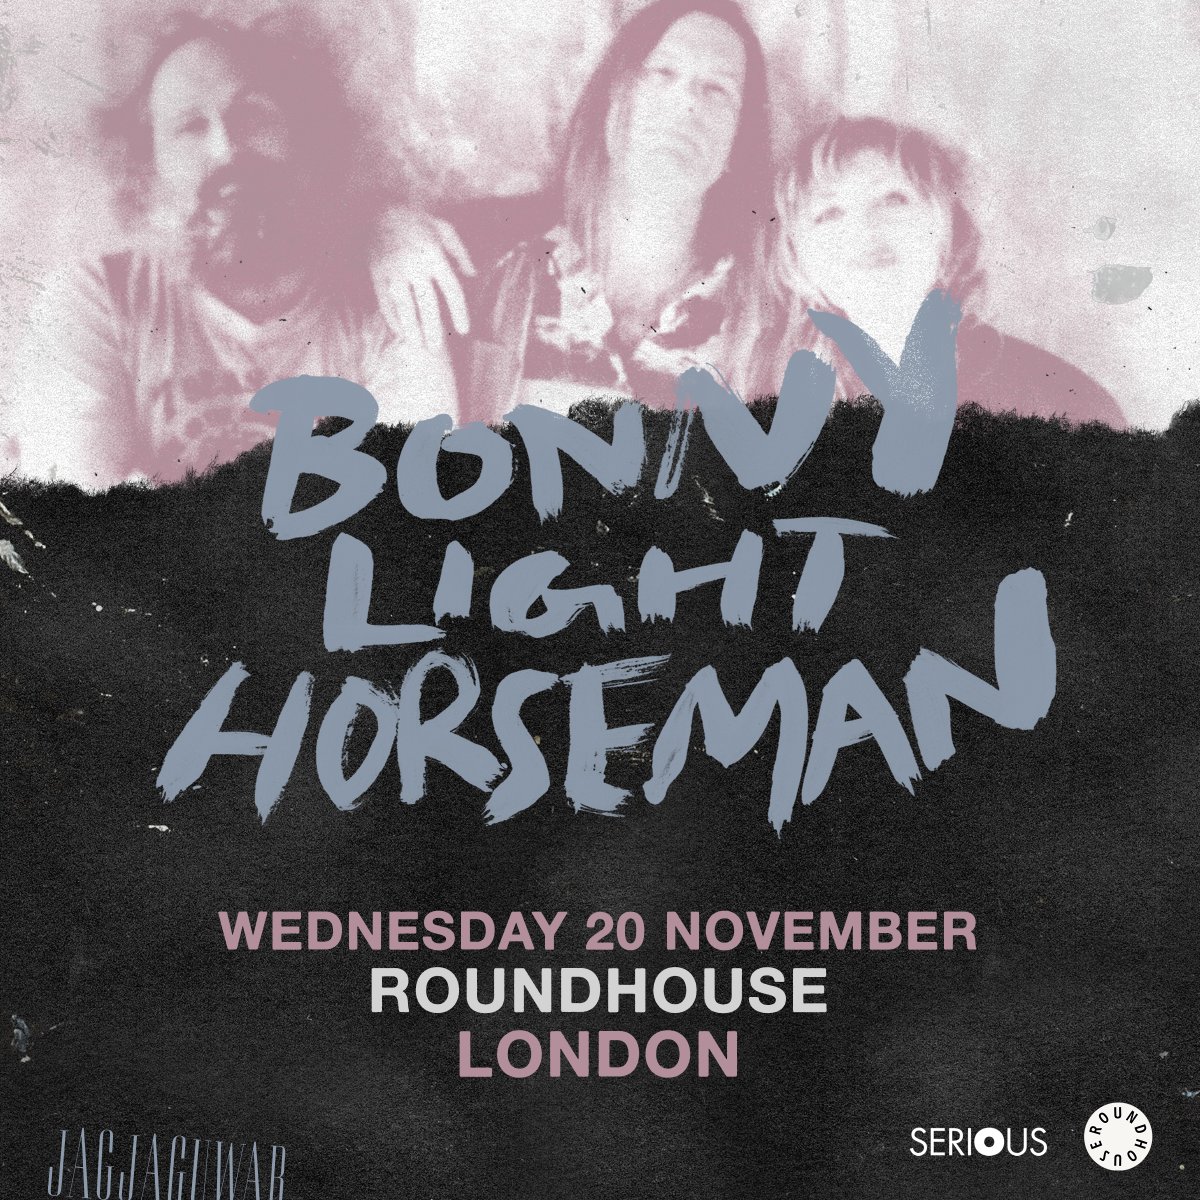 Book now for @bonnylightband who perform at the legendary @RoundhouseLDN this November! Book now at serious.org.uk/bonnylighthors…